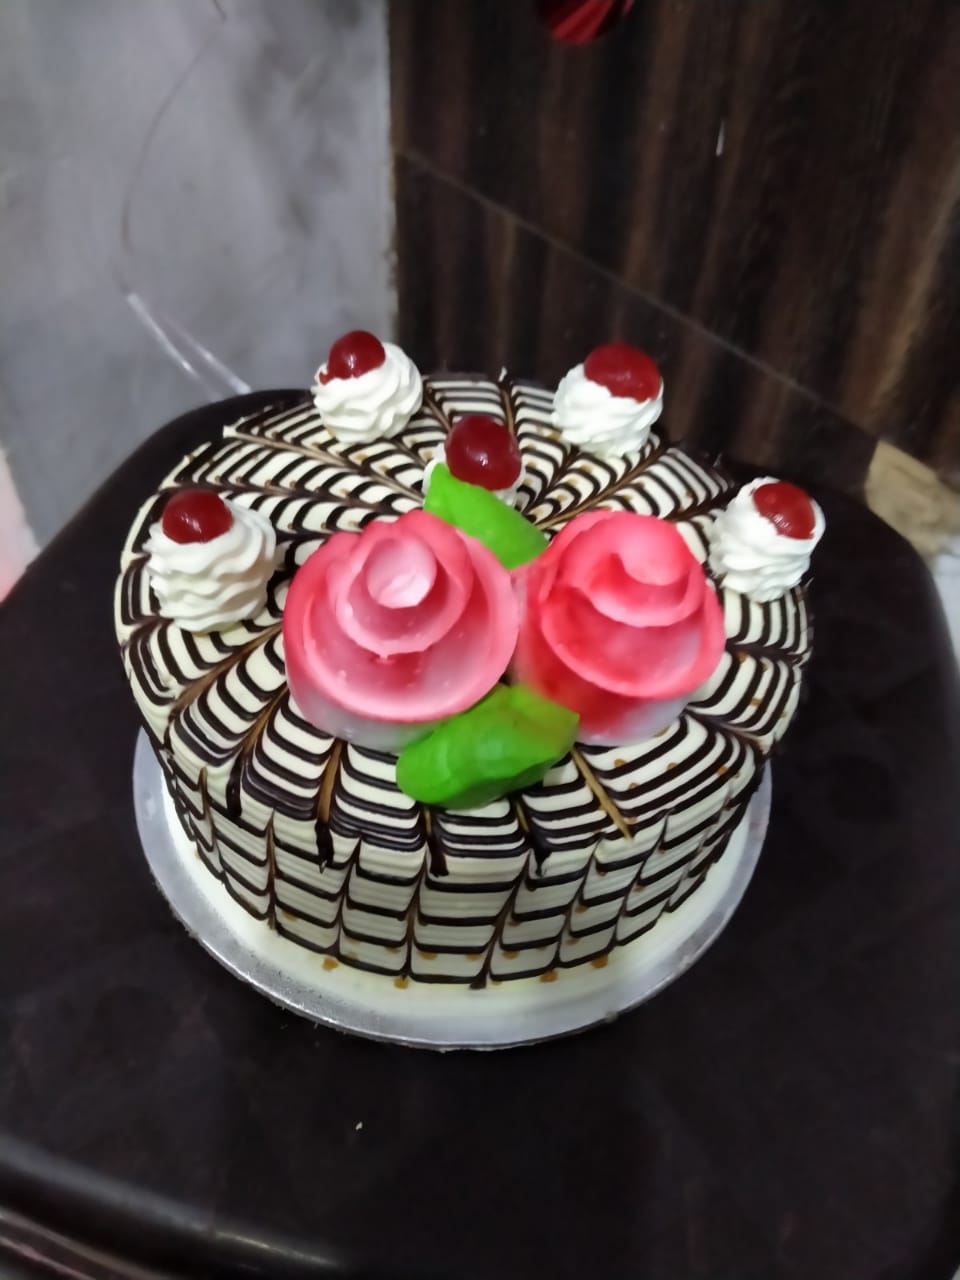 Today's order cake.Happy... - Shweta's Cakes and creativity | Facebook